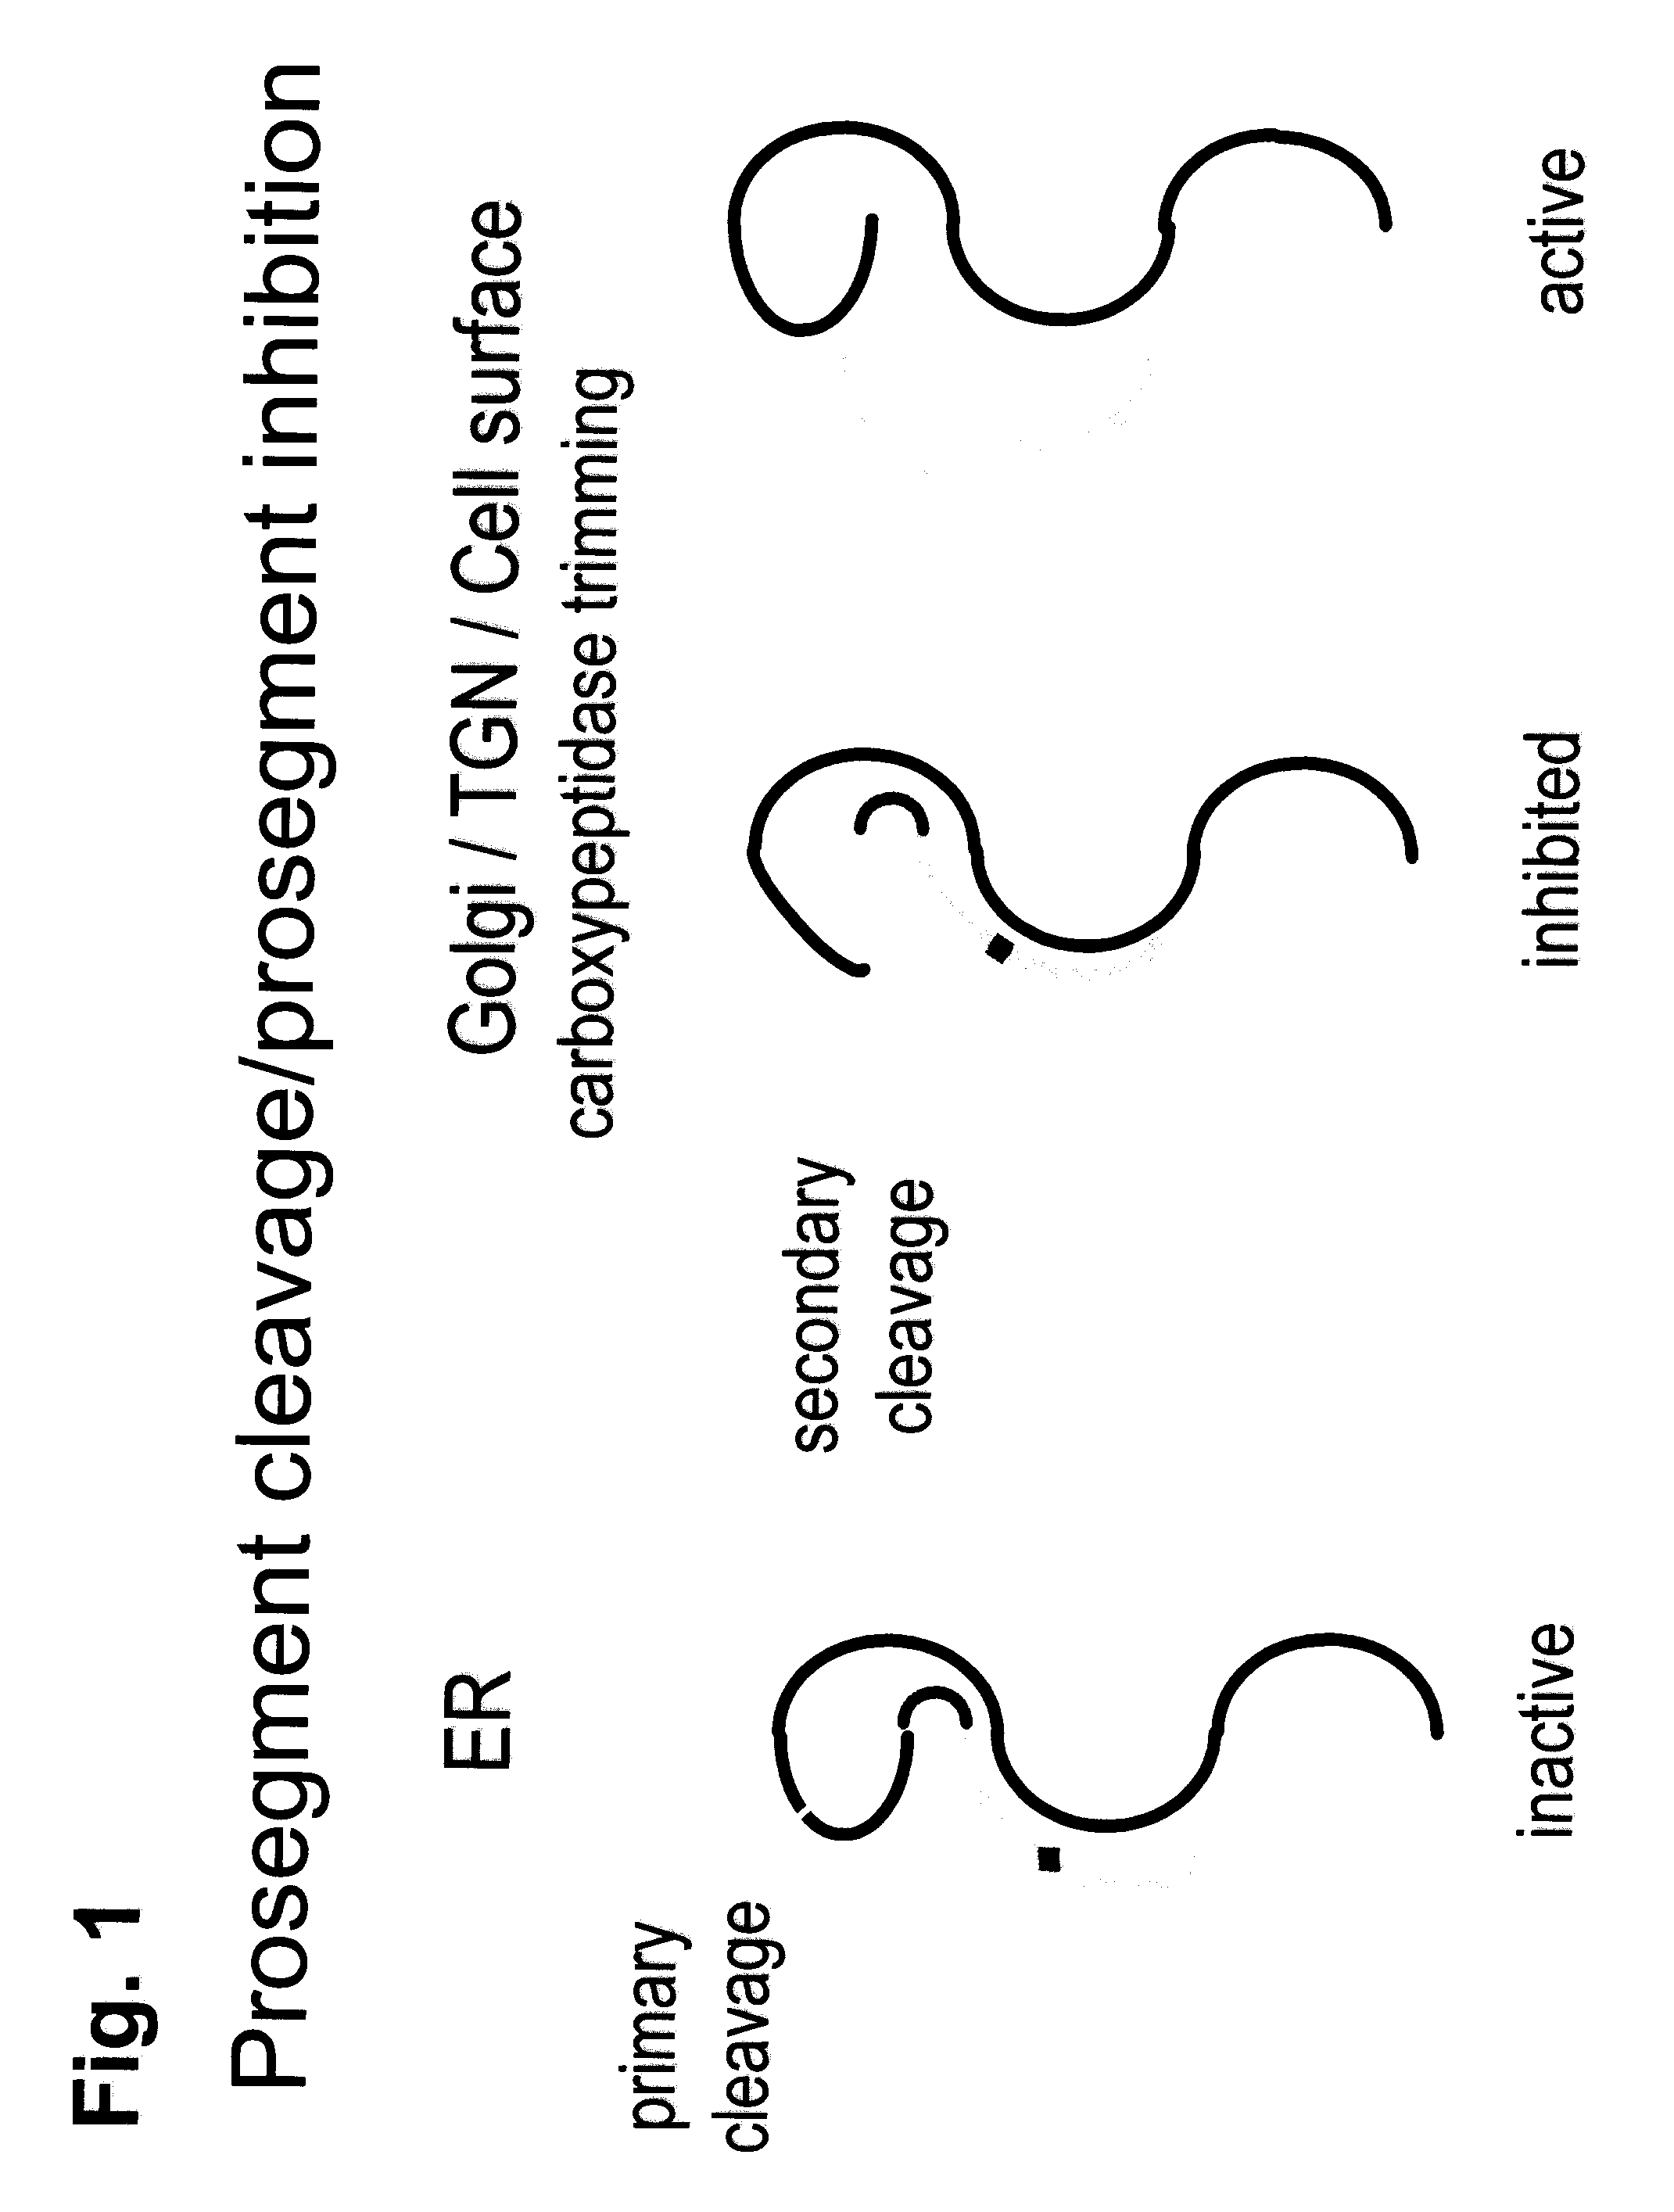 Chimeric PCSK9 proteins, cells comprising same, and assays using same